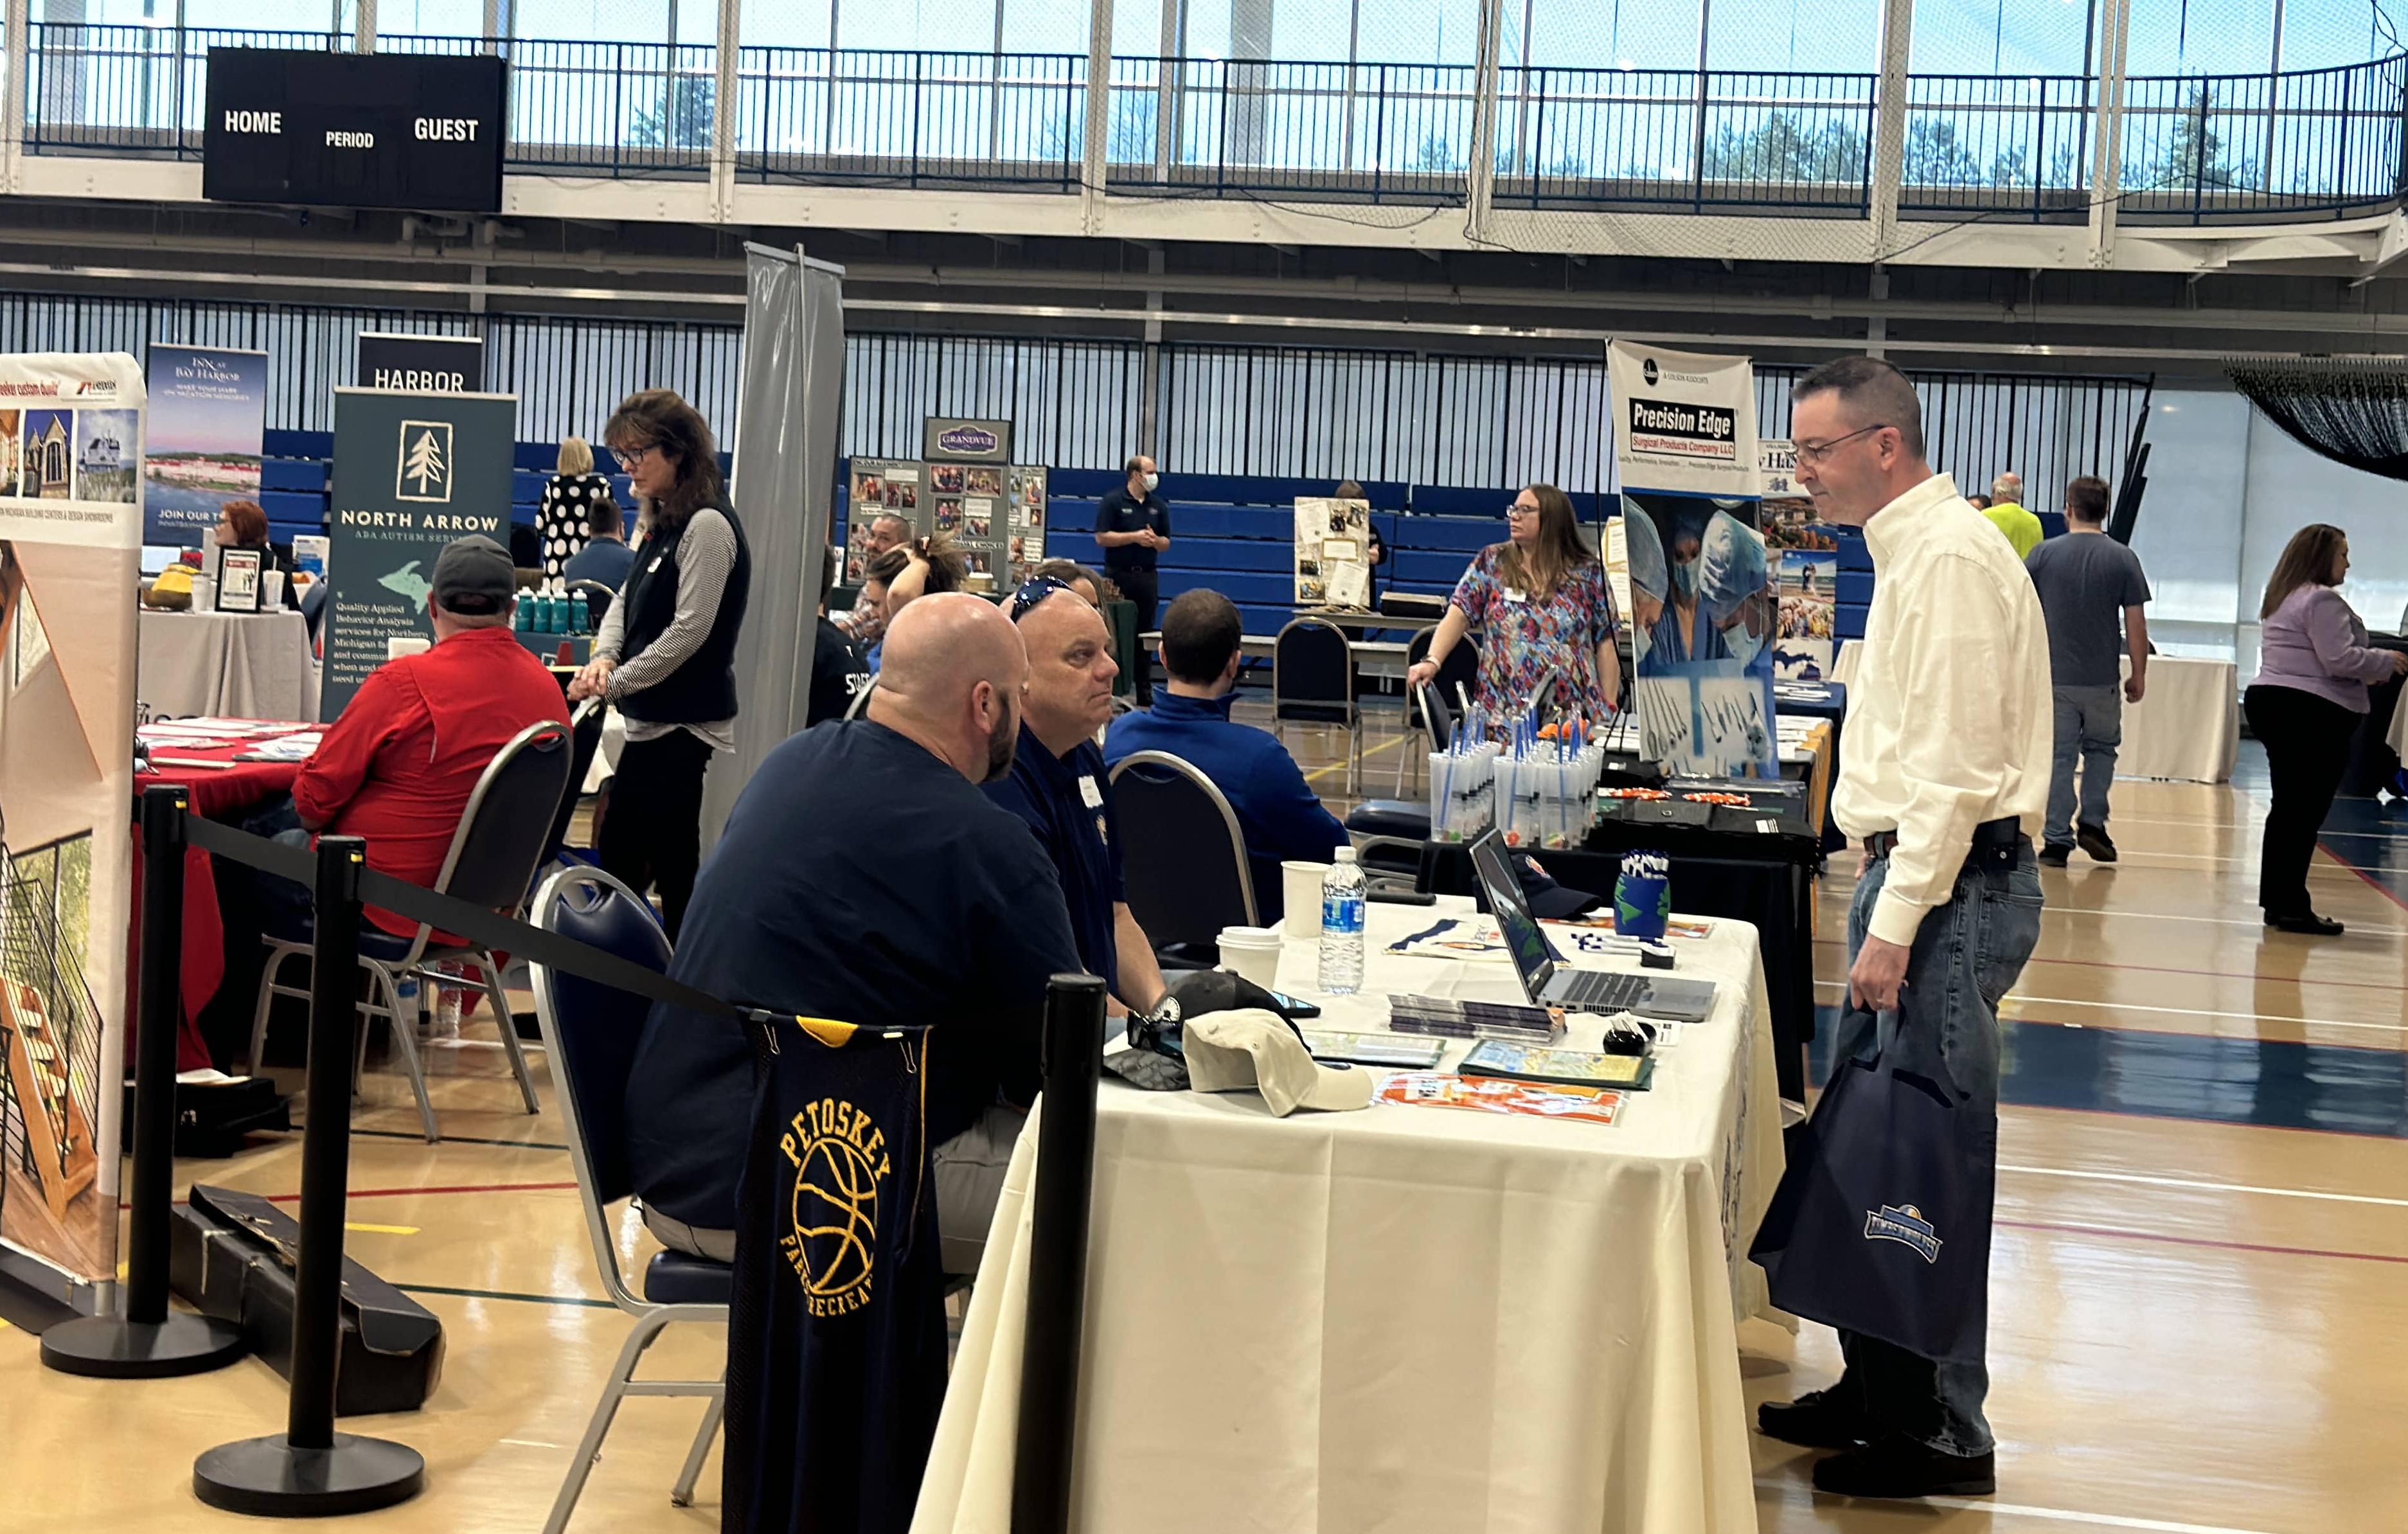 Vendors and attendees at career fair